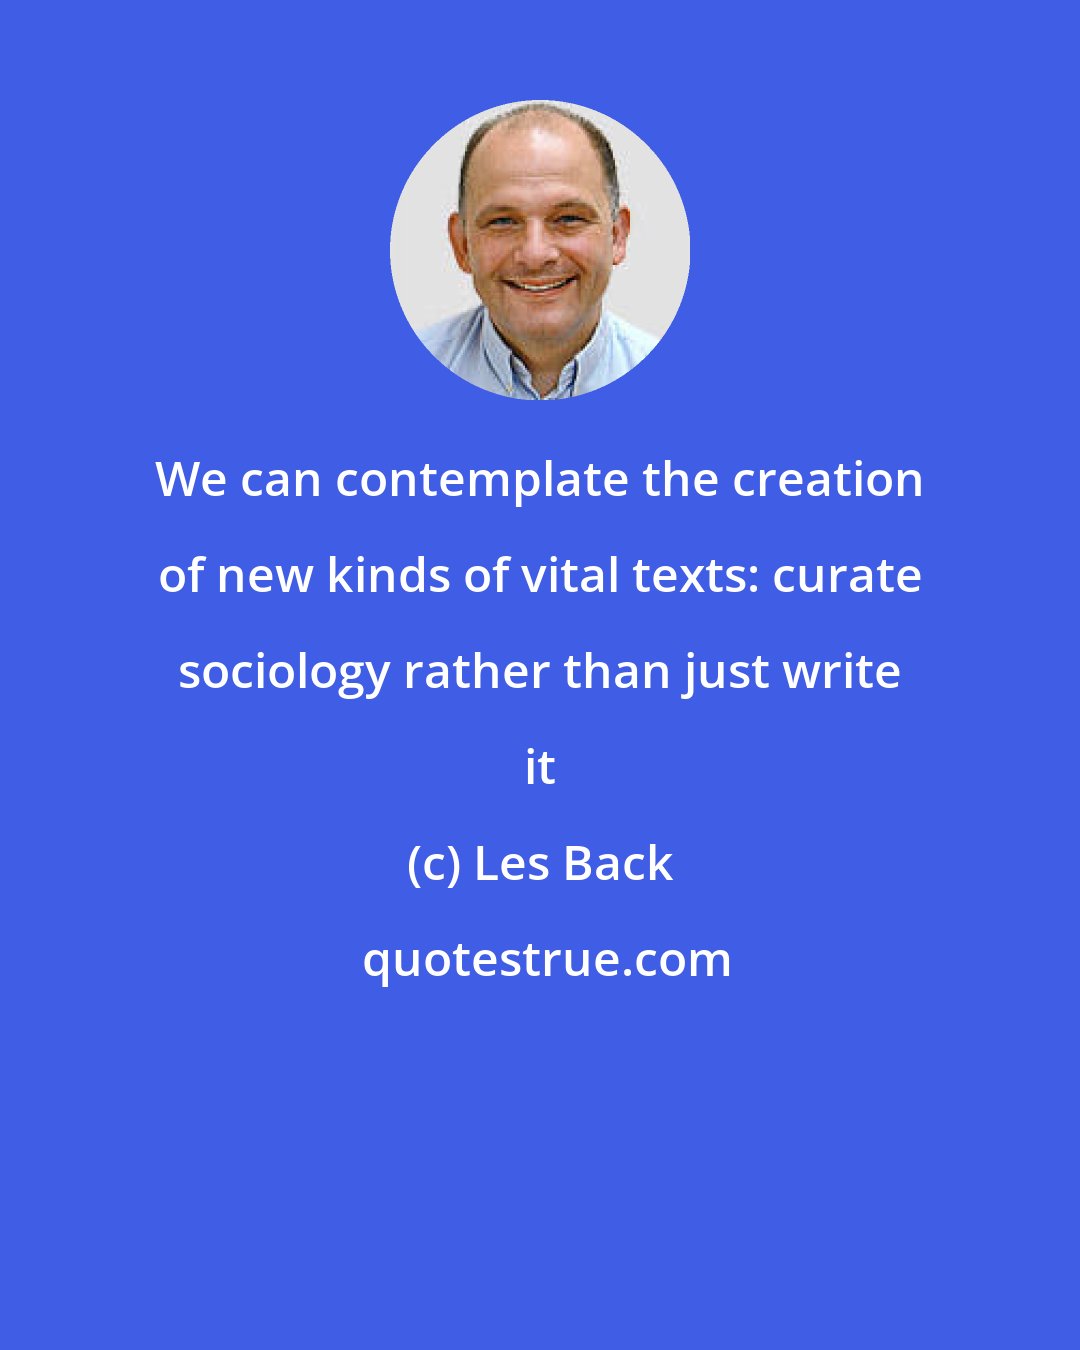 Les Back: We can contemplate the creation of new kinds of vital texts: curate sociology rather than just write it